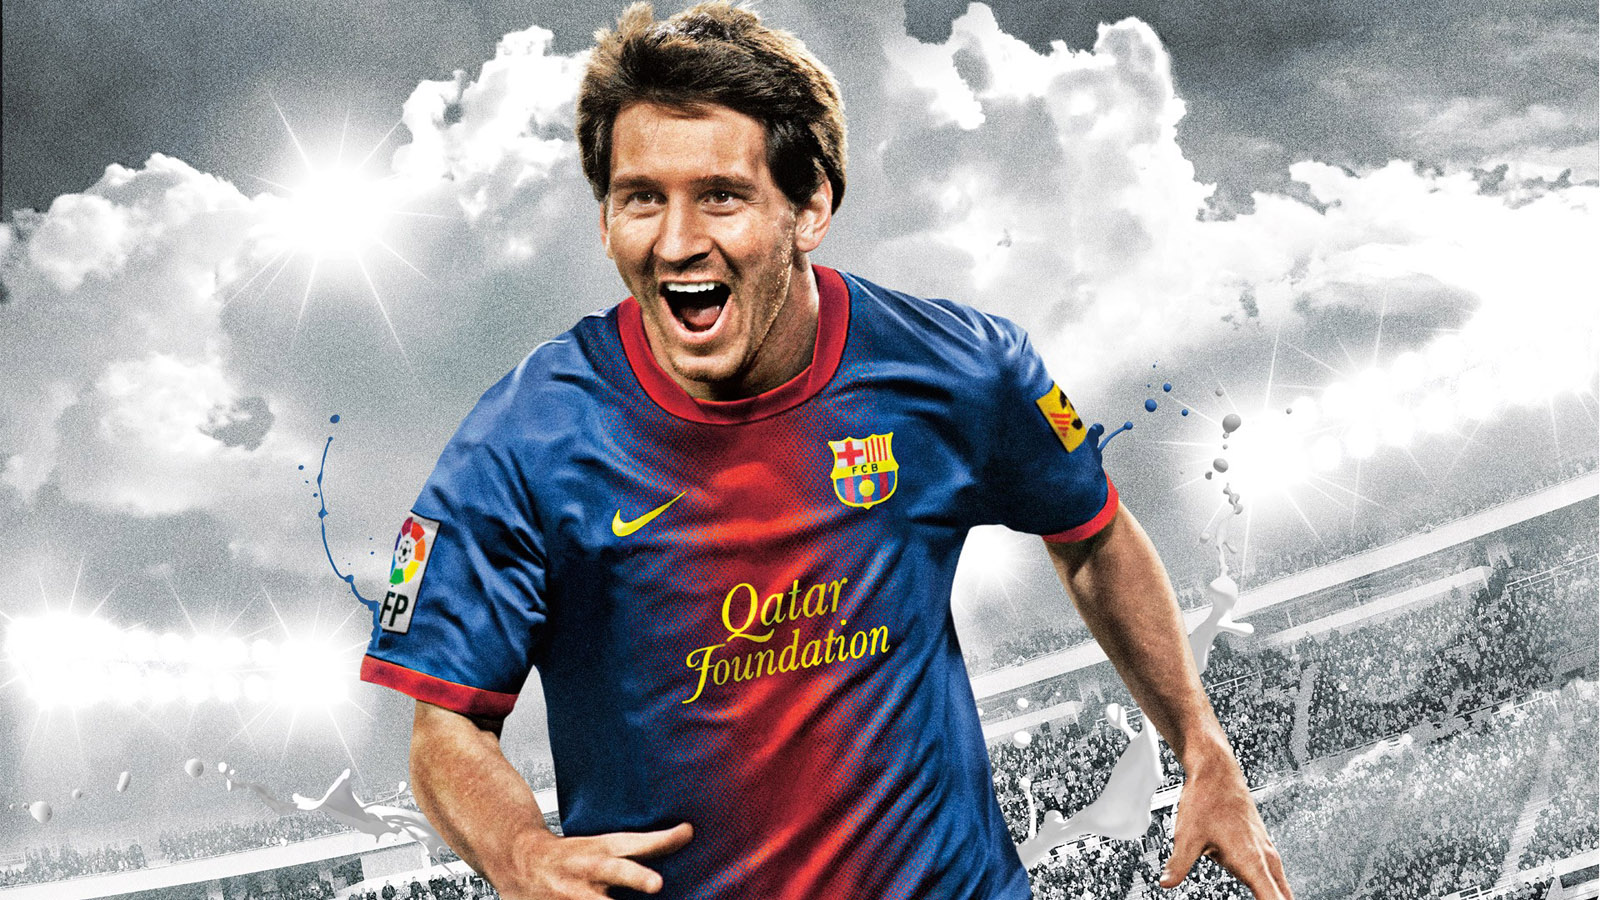 Lionel Messi Wallpapers And Image On FIFA 14 Free Download